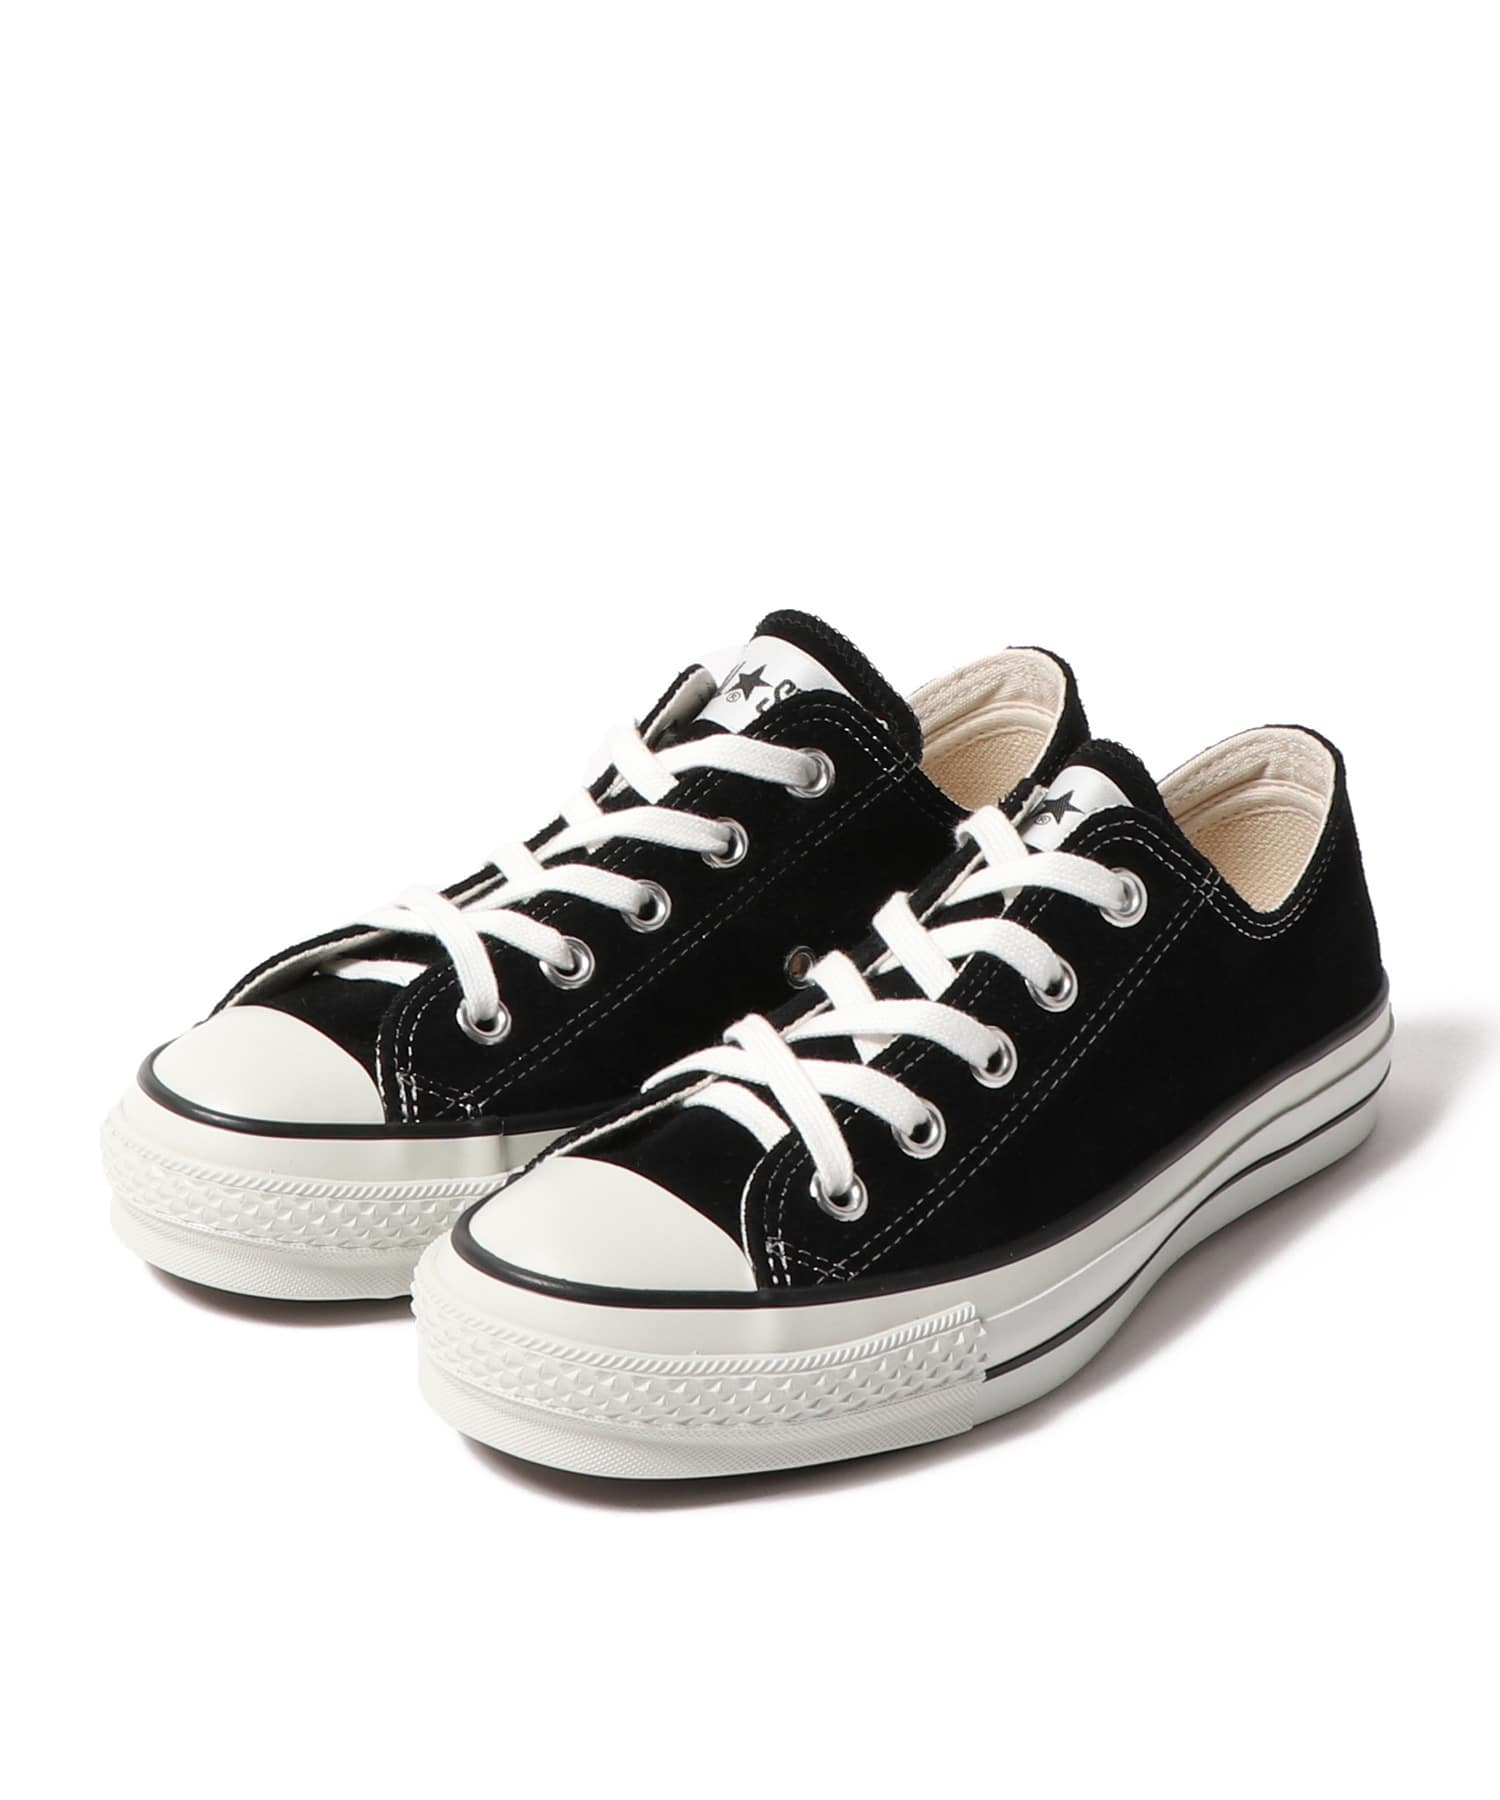 CONVERSE/SUEDE ALL STAR J OX/スエード 日本製